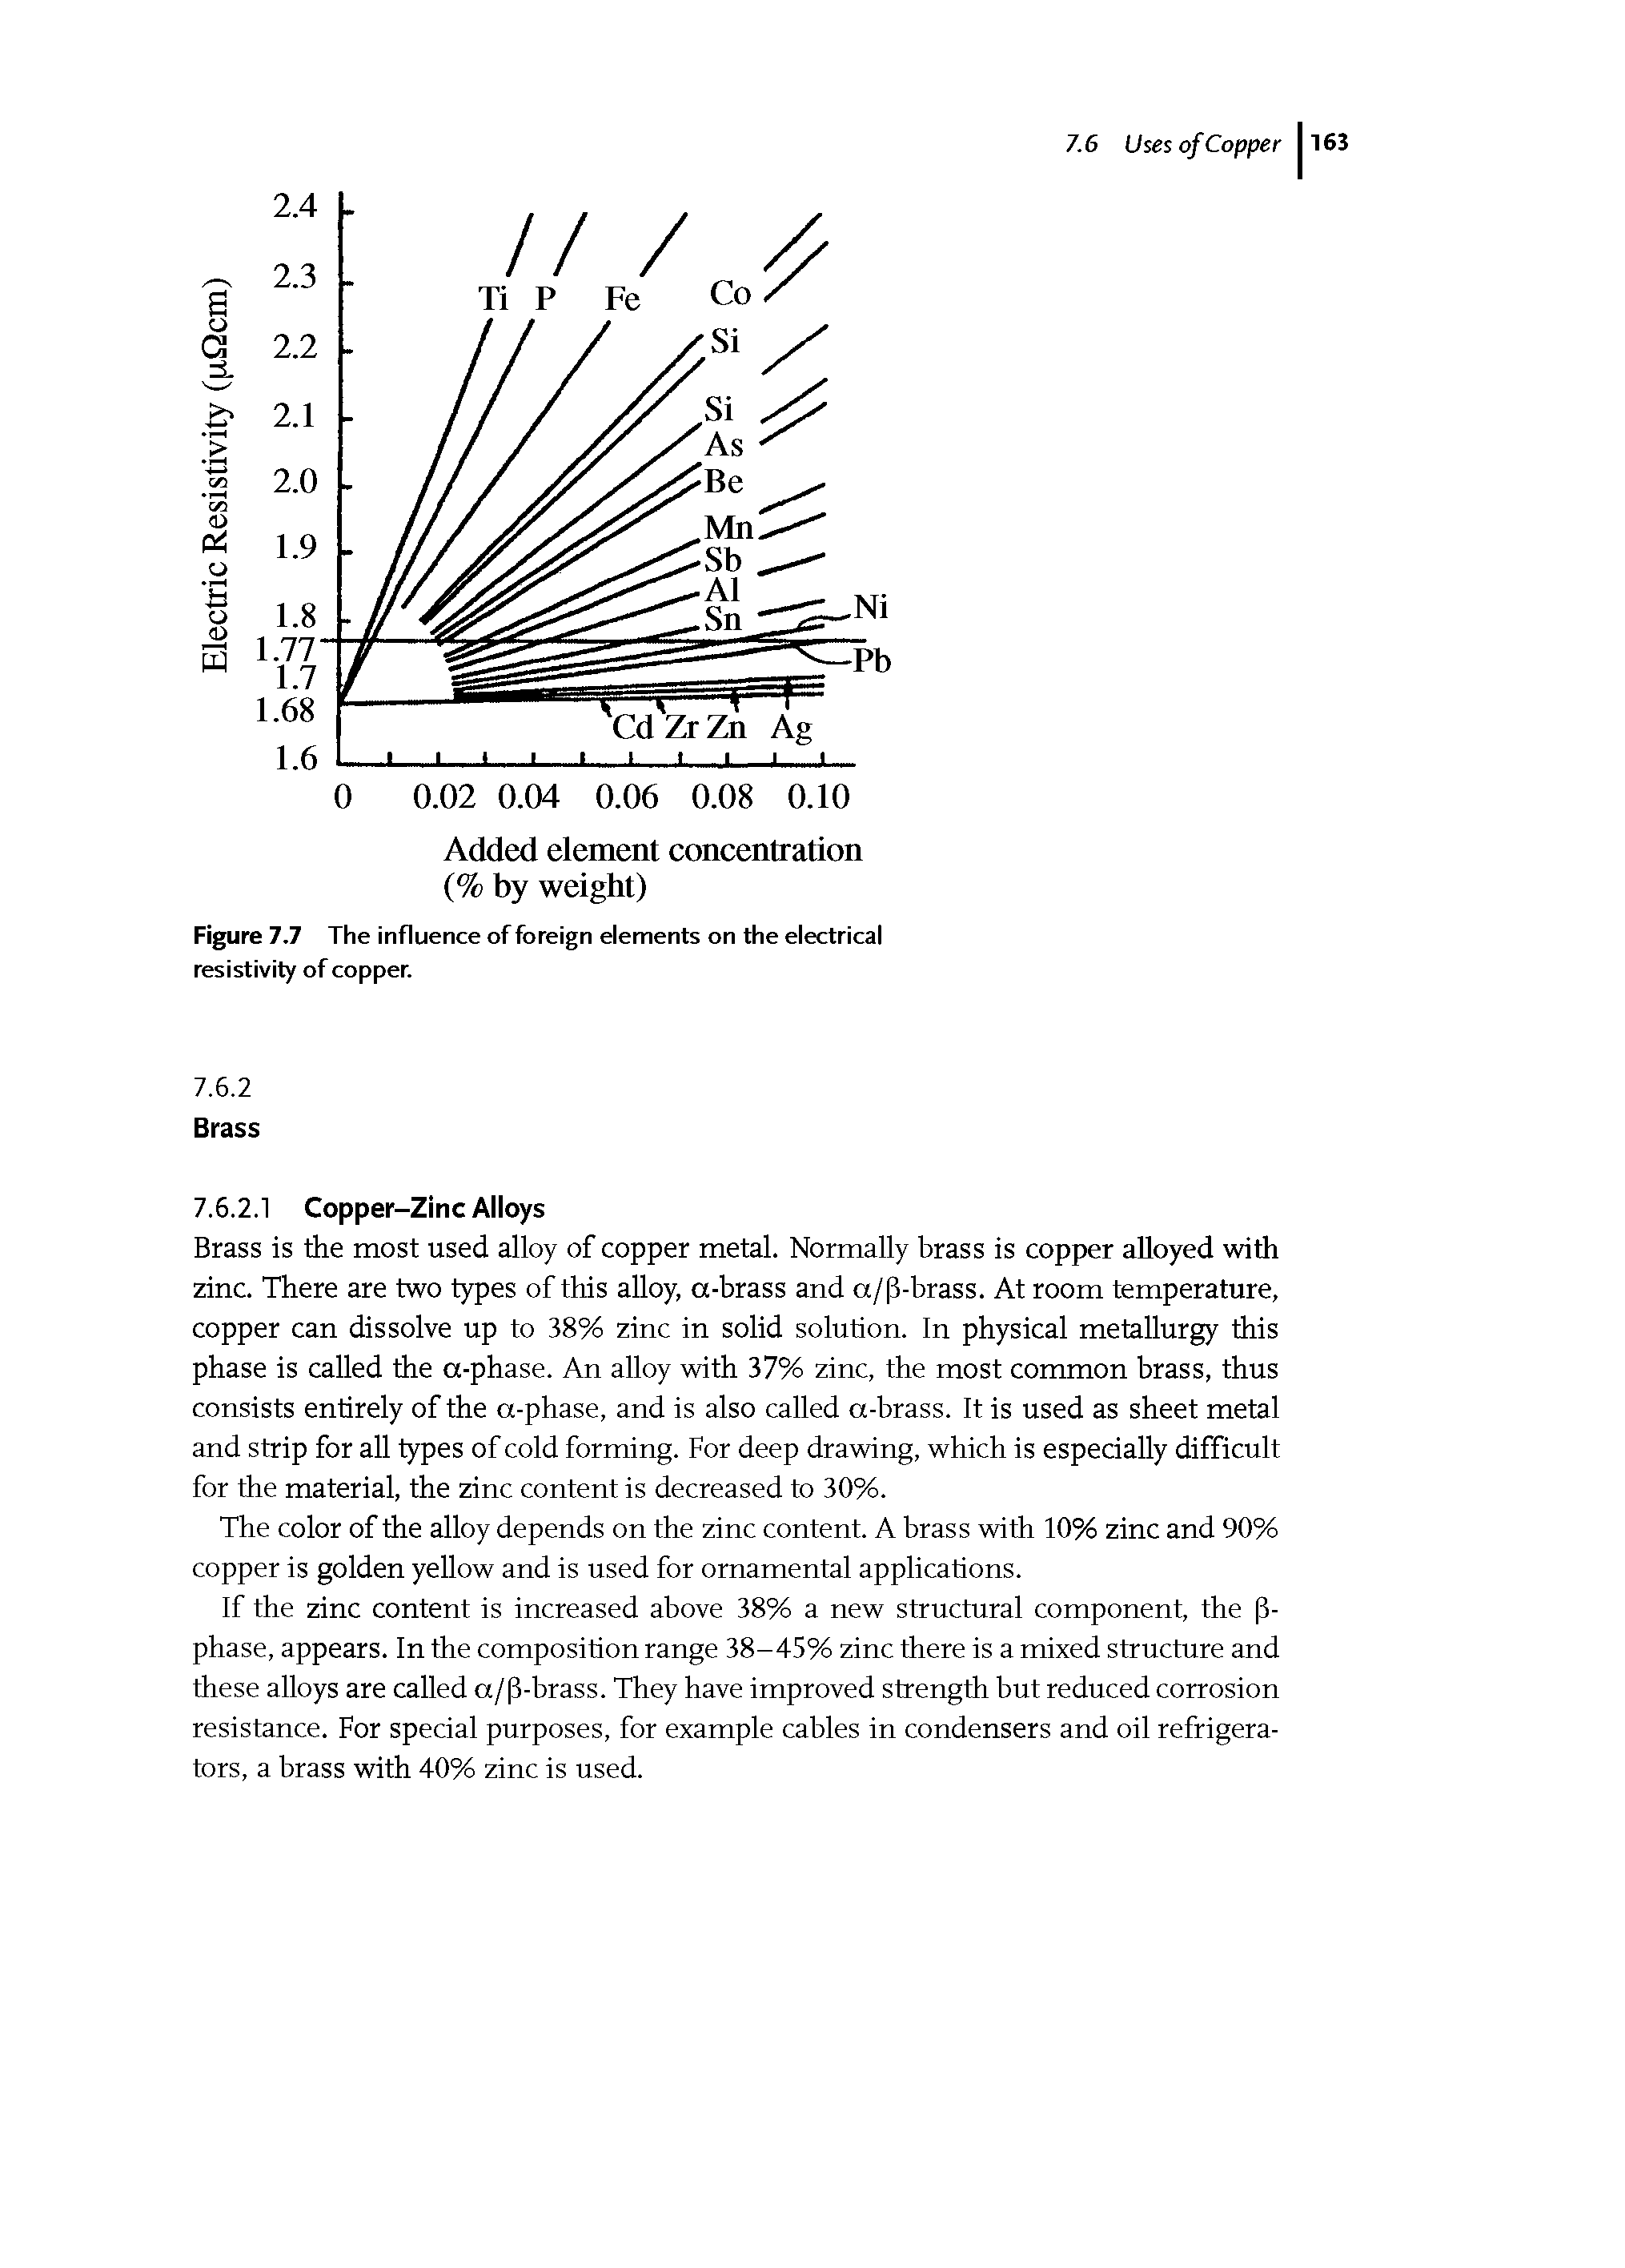 Figure 7.7 The influence of foreign elements on the electrical resistivity of copper.